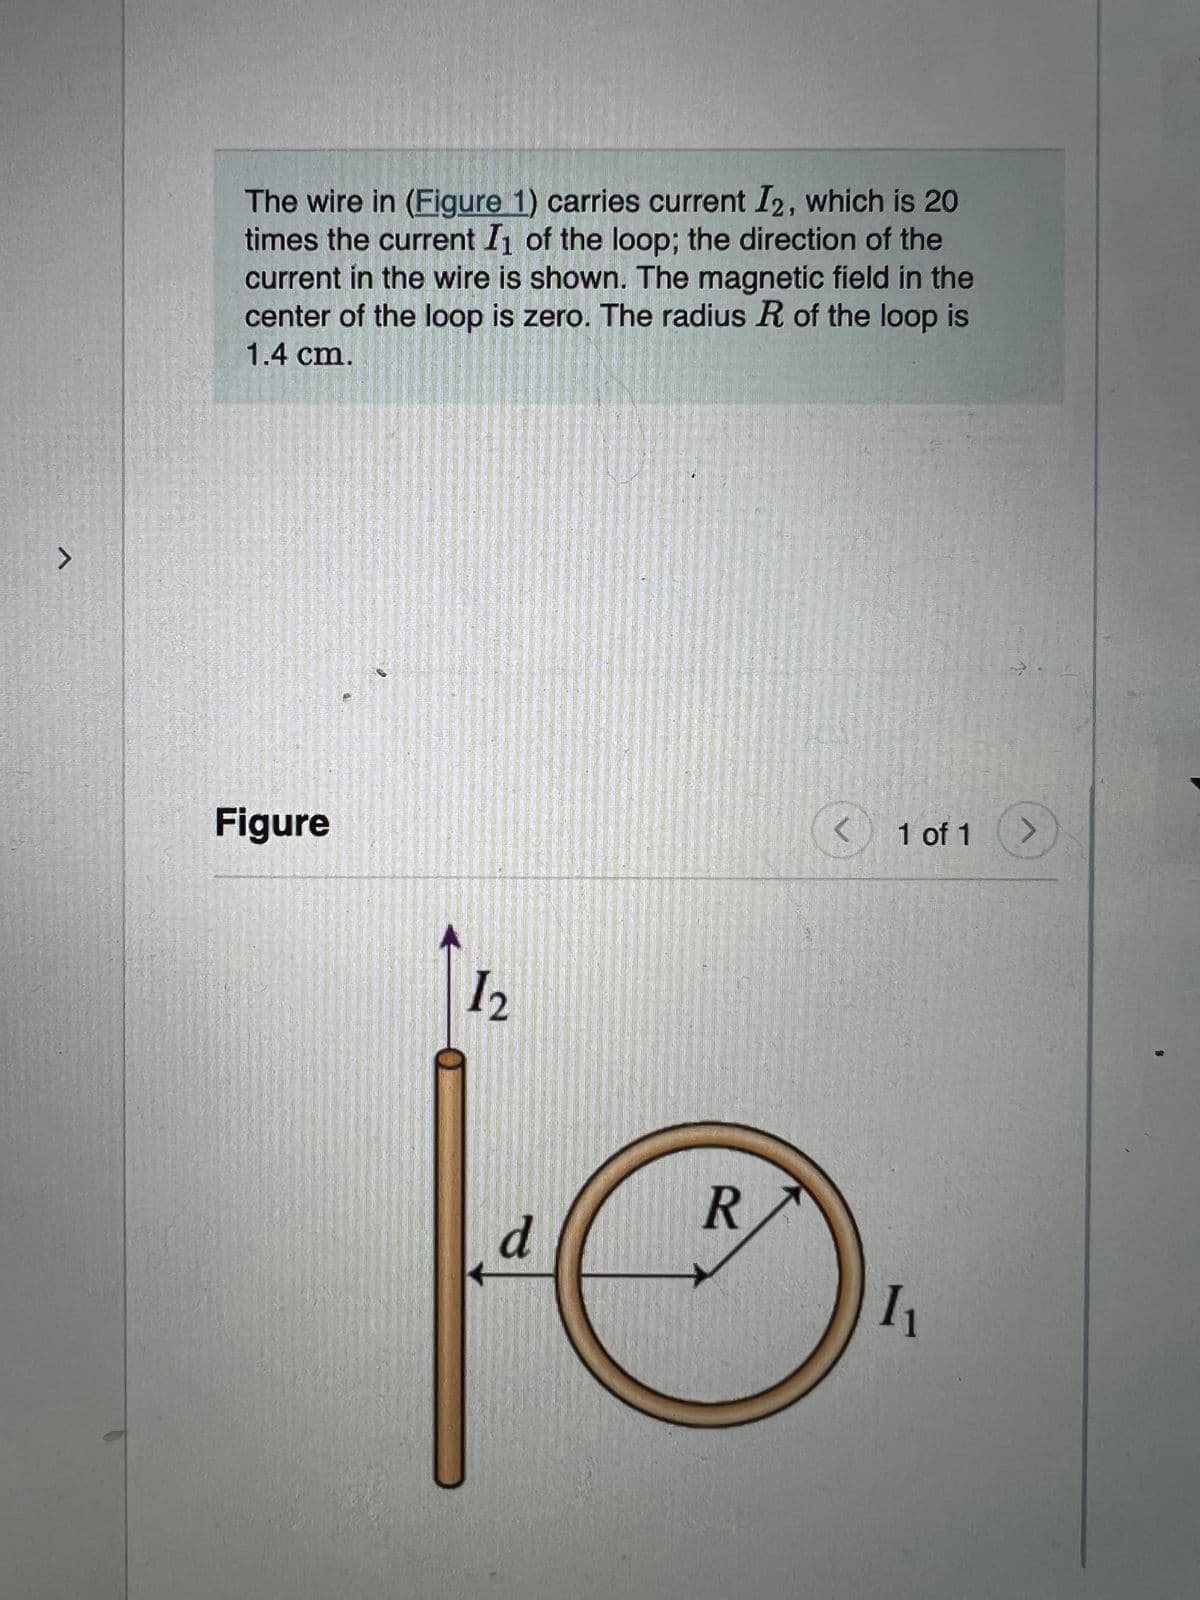 >
The wire in (Figure 1) carries current I2, which is 20
times the current I₁ of the loop; the direction of the
current in the wire is shown. The magnetic field in the
center of the loop is zero. The radius R of the loop is
1.4 cm.
Figure
<
1 of 1
>
1₂
d
R
1₁